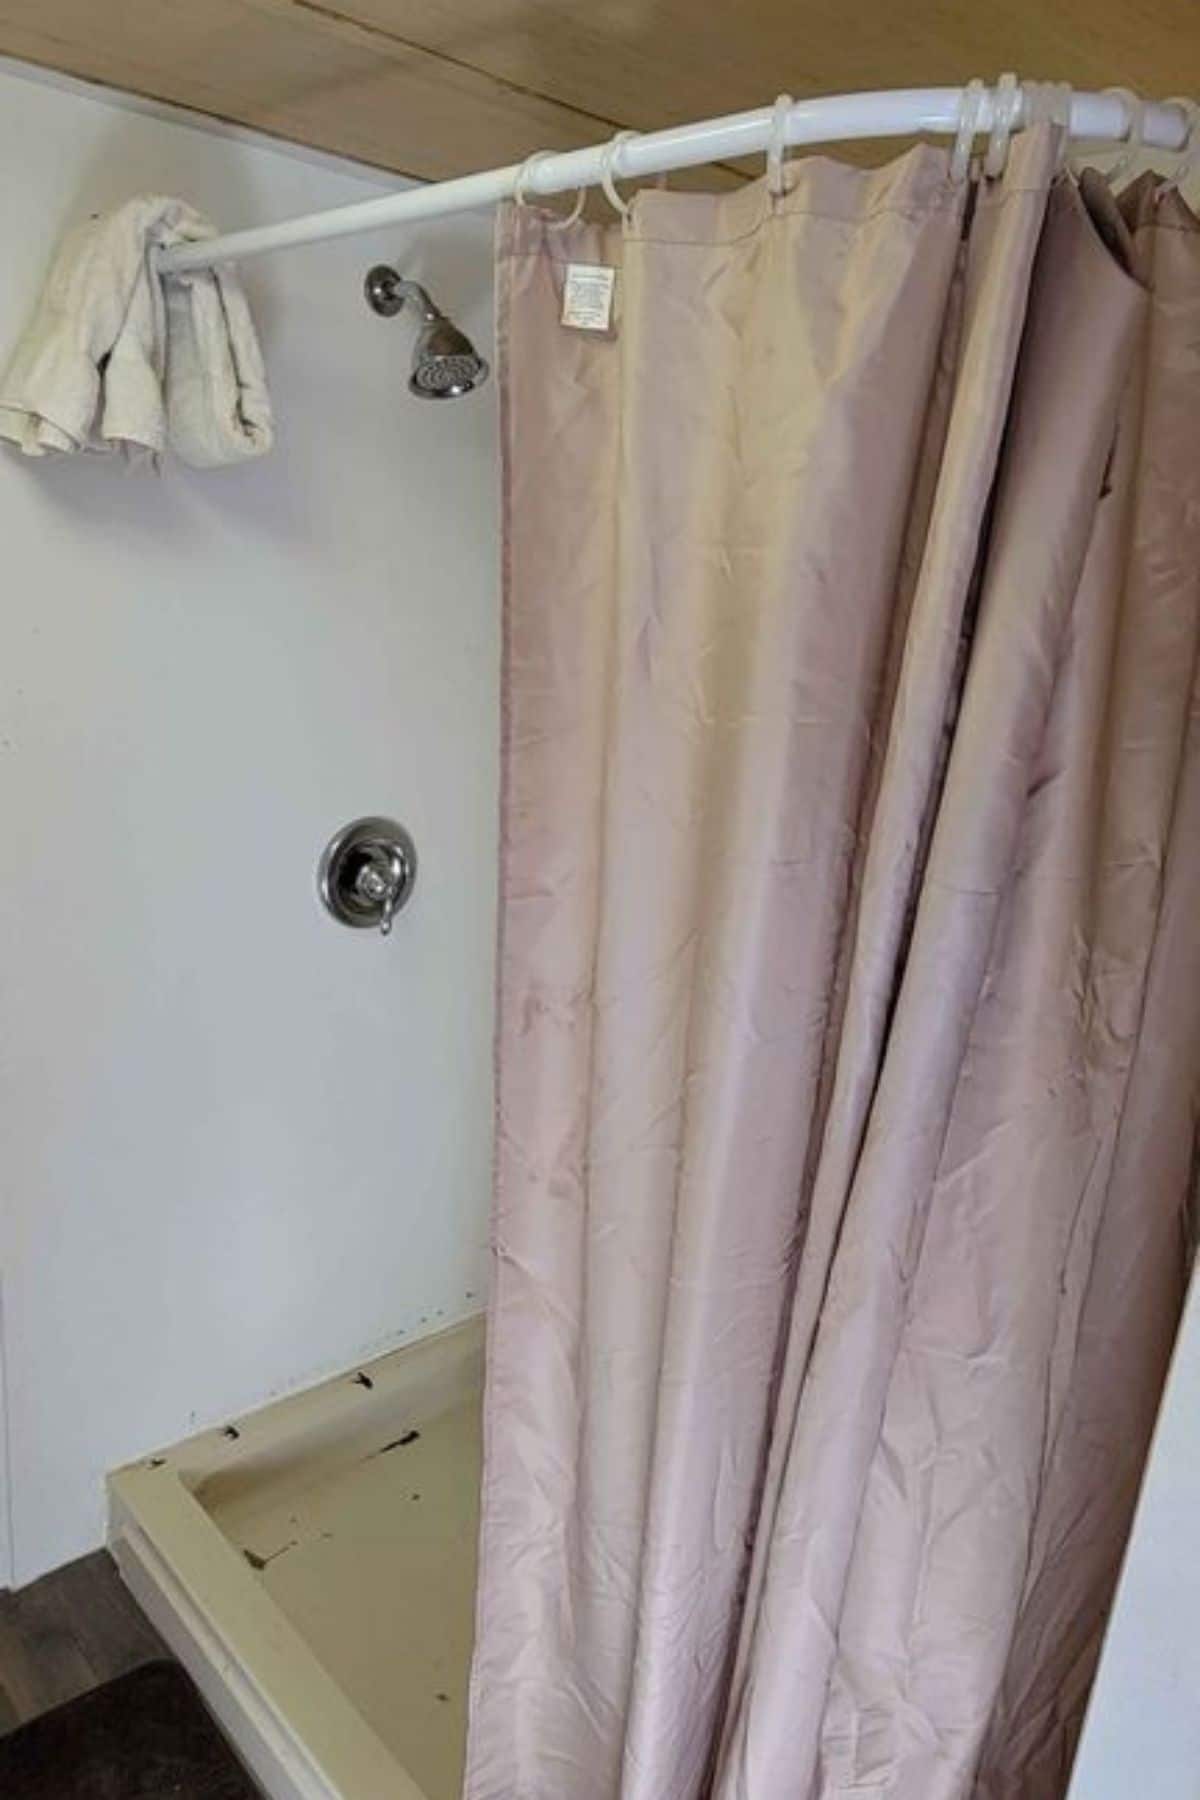 shower stall with white surround and pink shower curtain